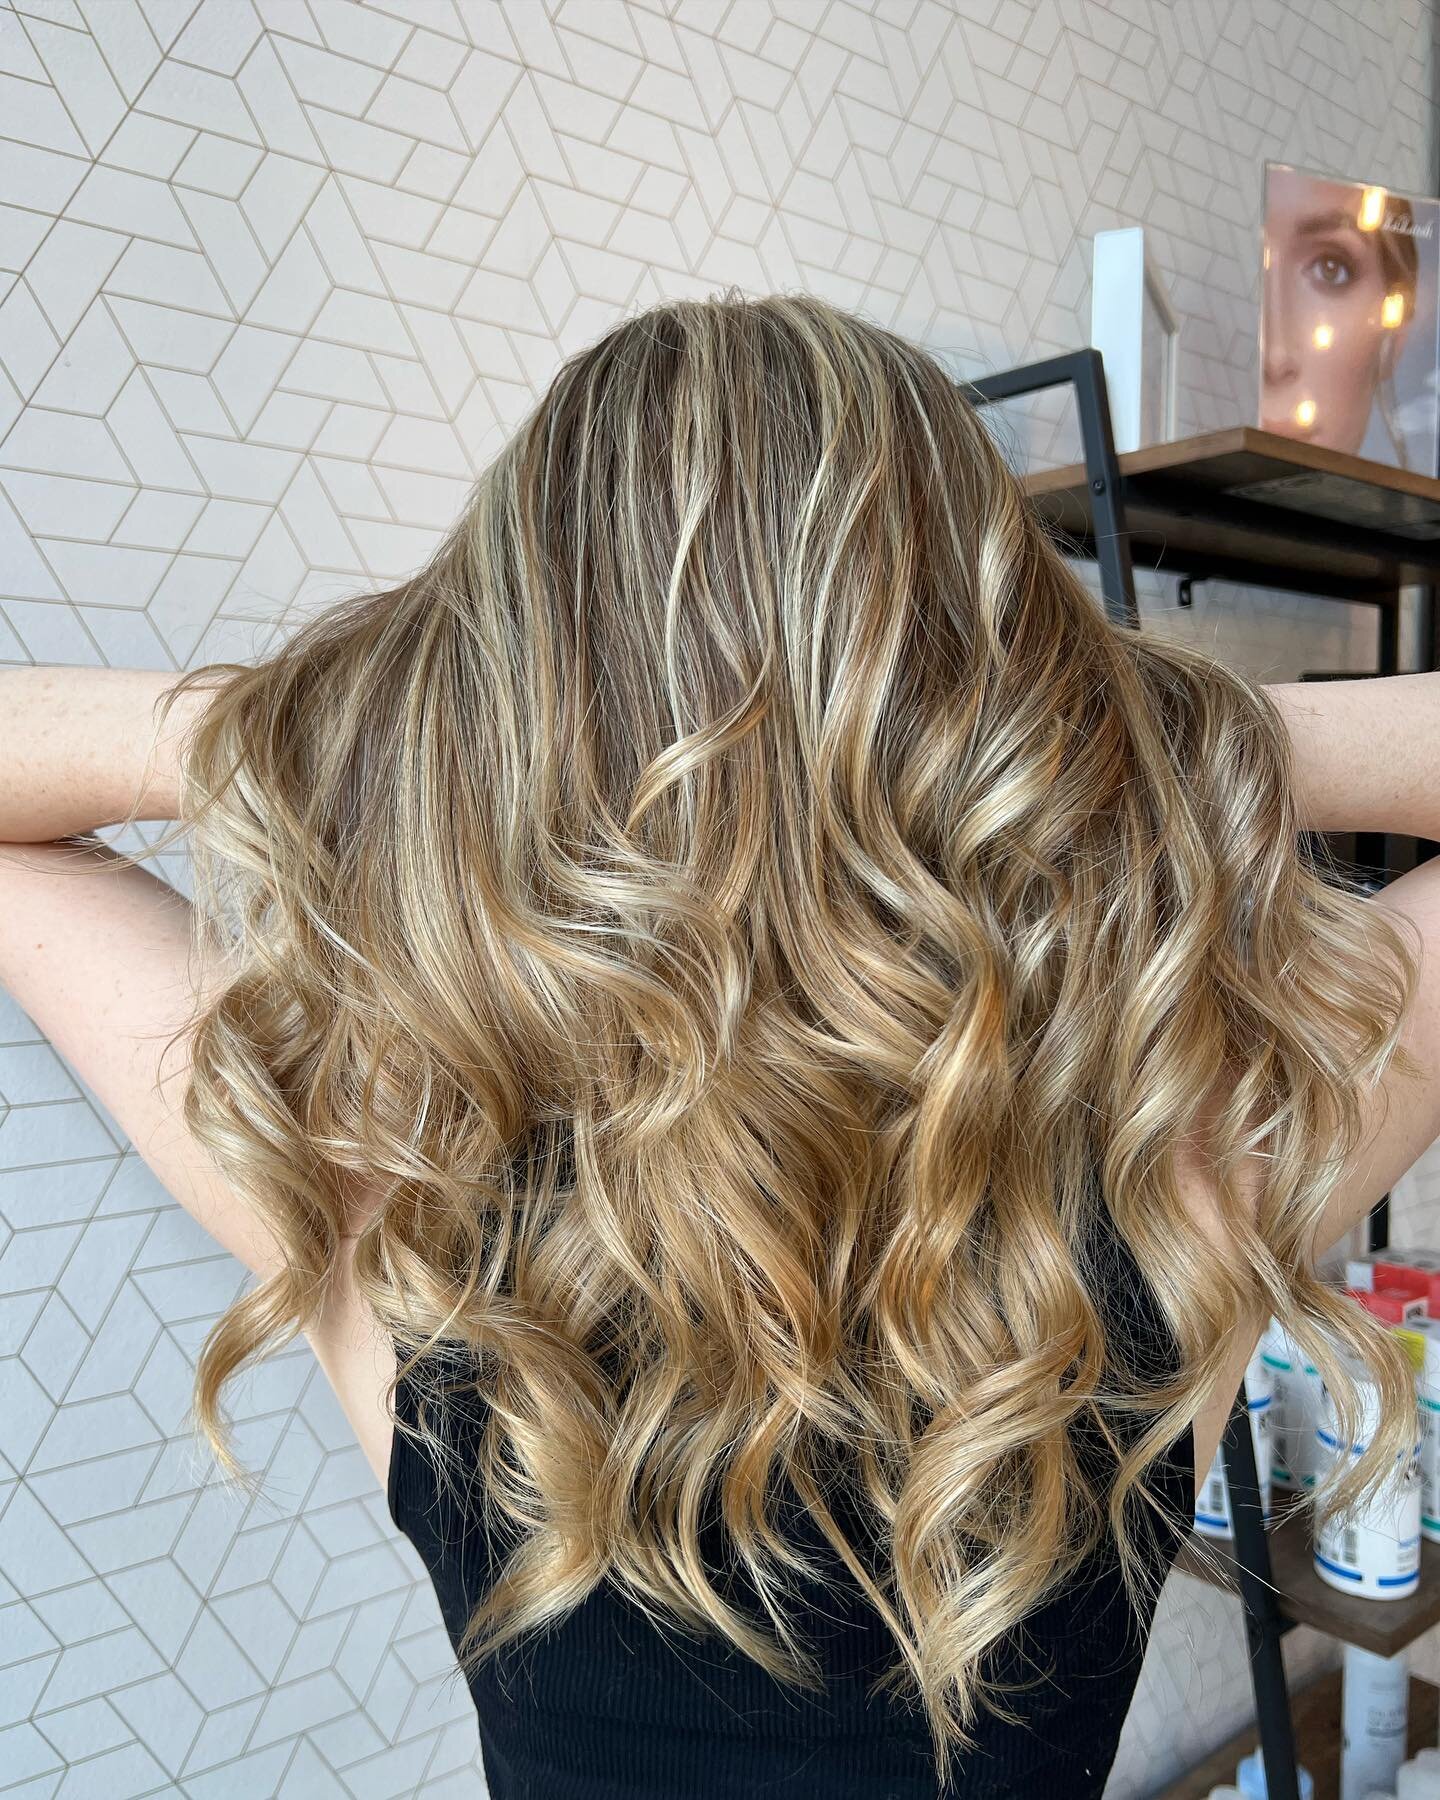 Scroll to the the before &mdash;&gt; 
Highlights, balayage, haircut and style by @constrathair 

Call the salon at (773)769-3237 or book your appointment online link In bio!

#andersonville #chicago #northsidechicago #hair #hairstylist #hairstyles #c